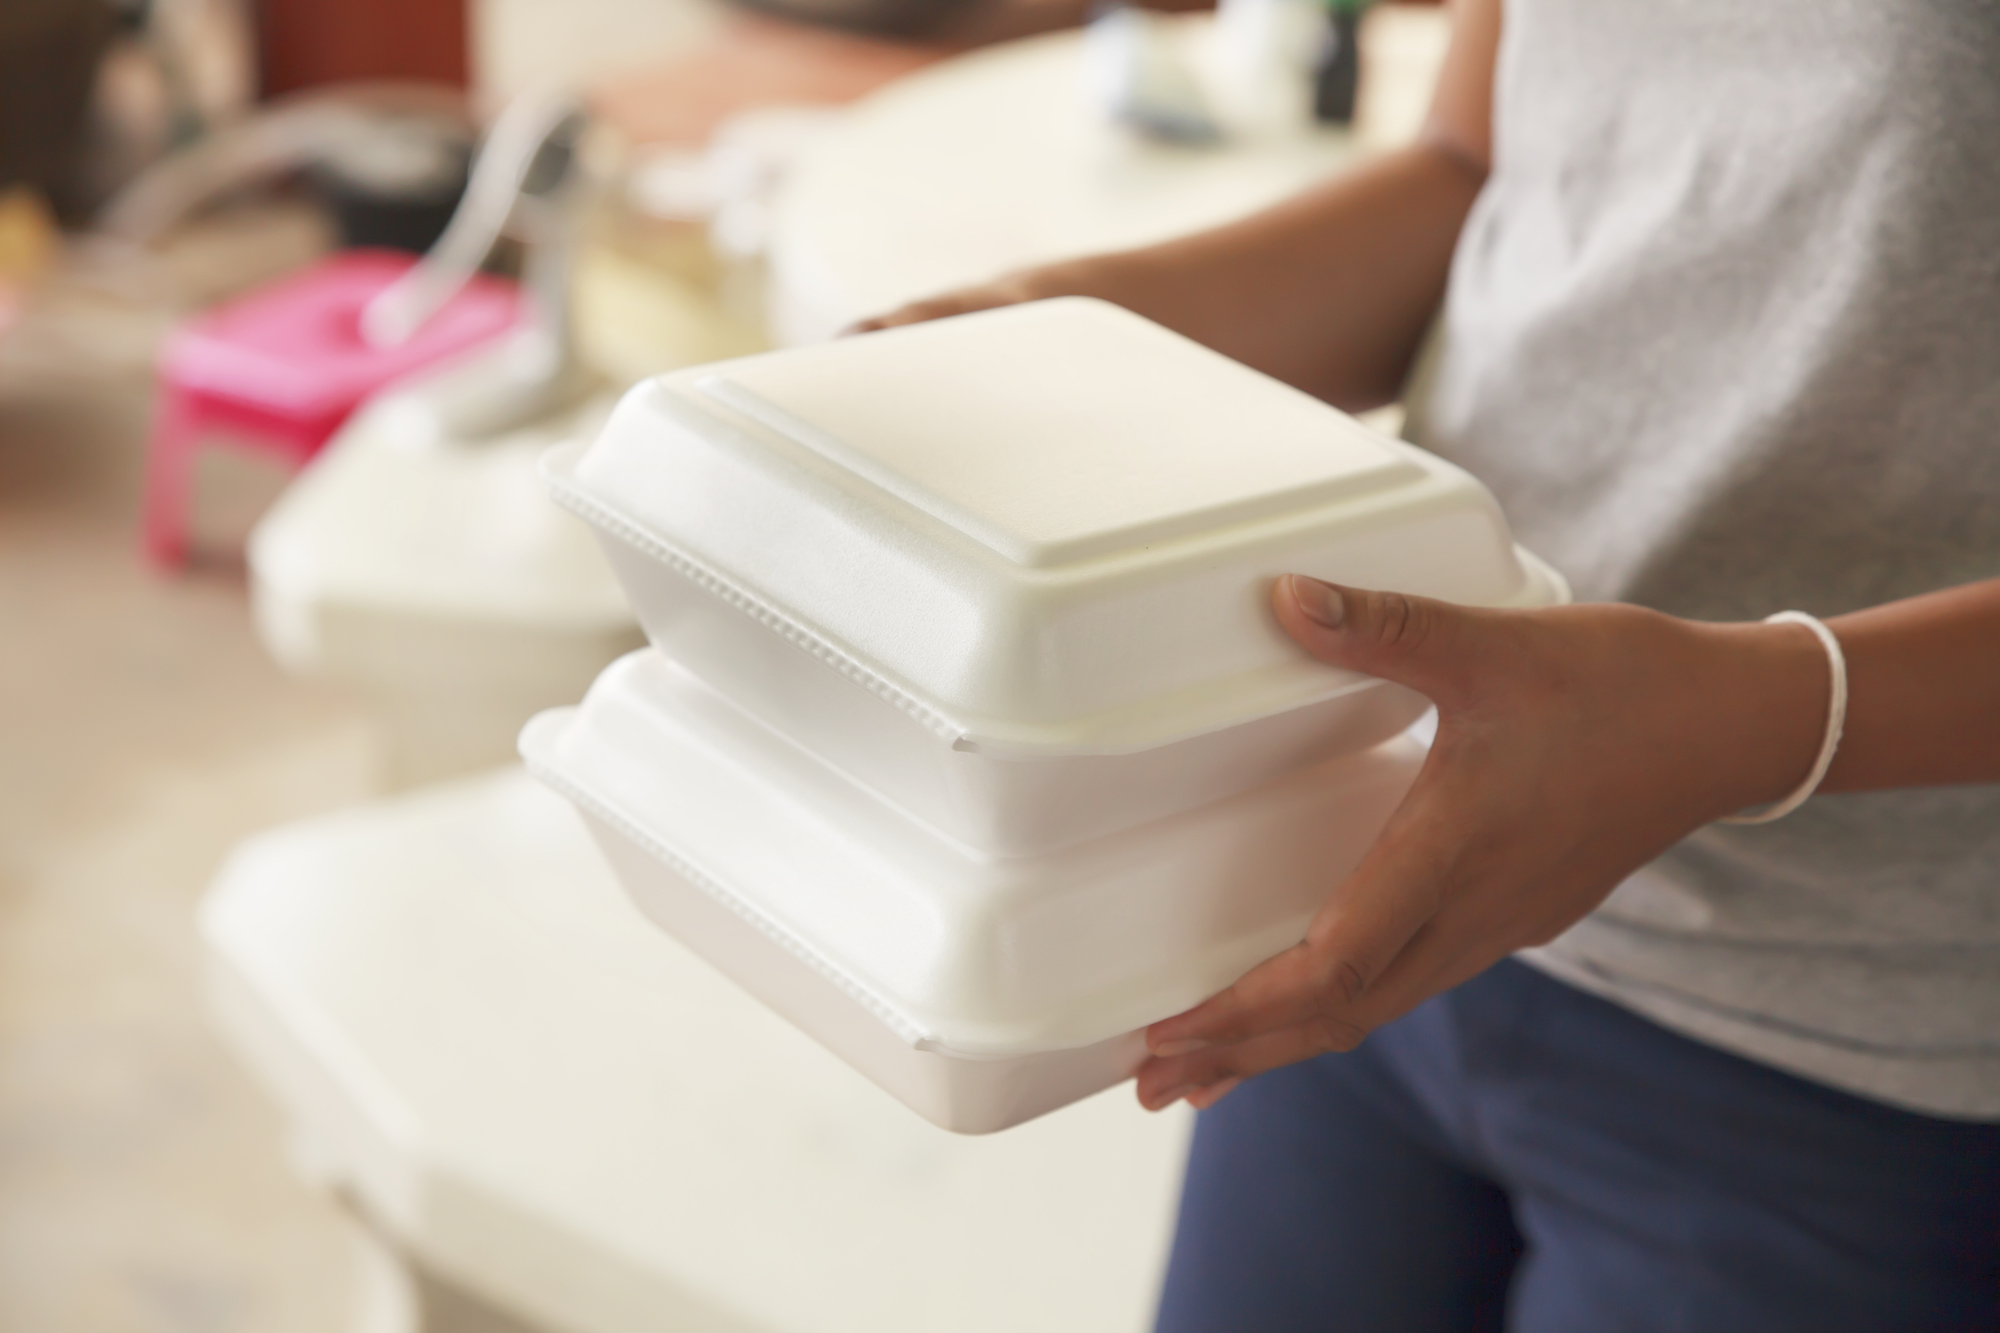 Can You Microwave Styrofoam, and Should You?